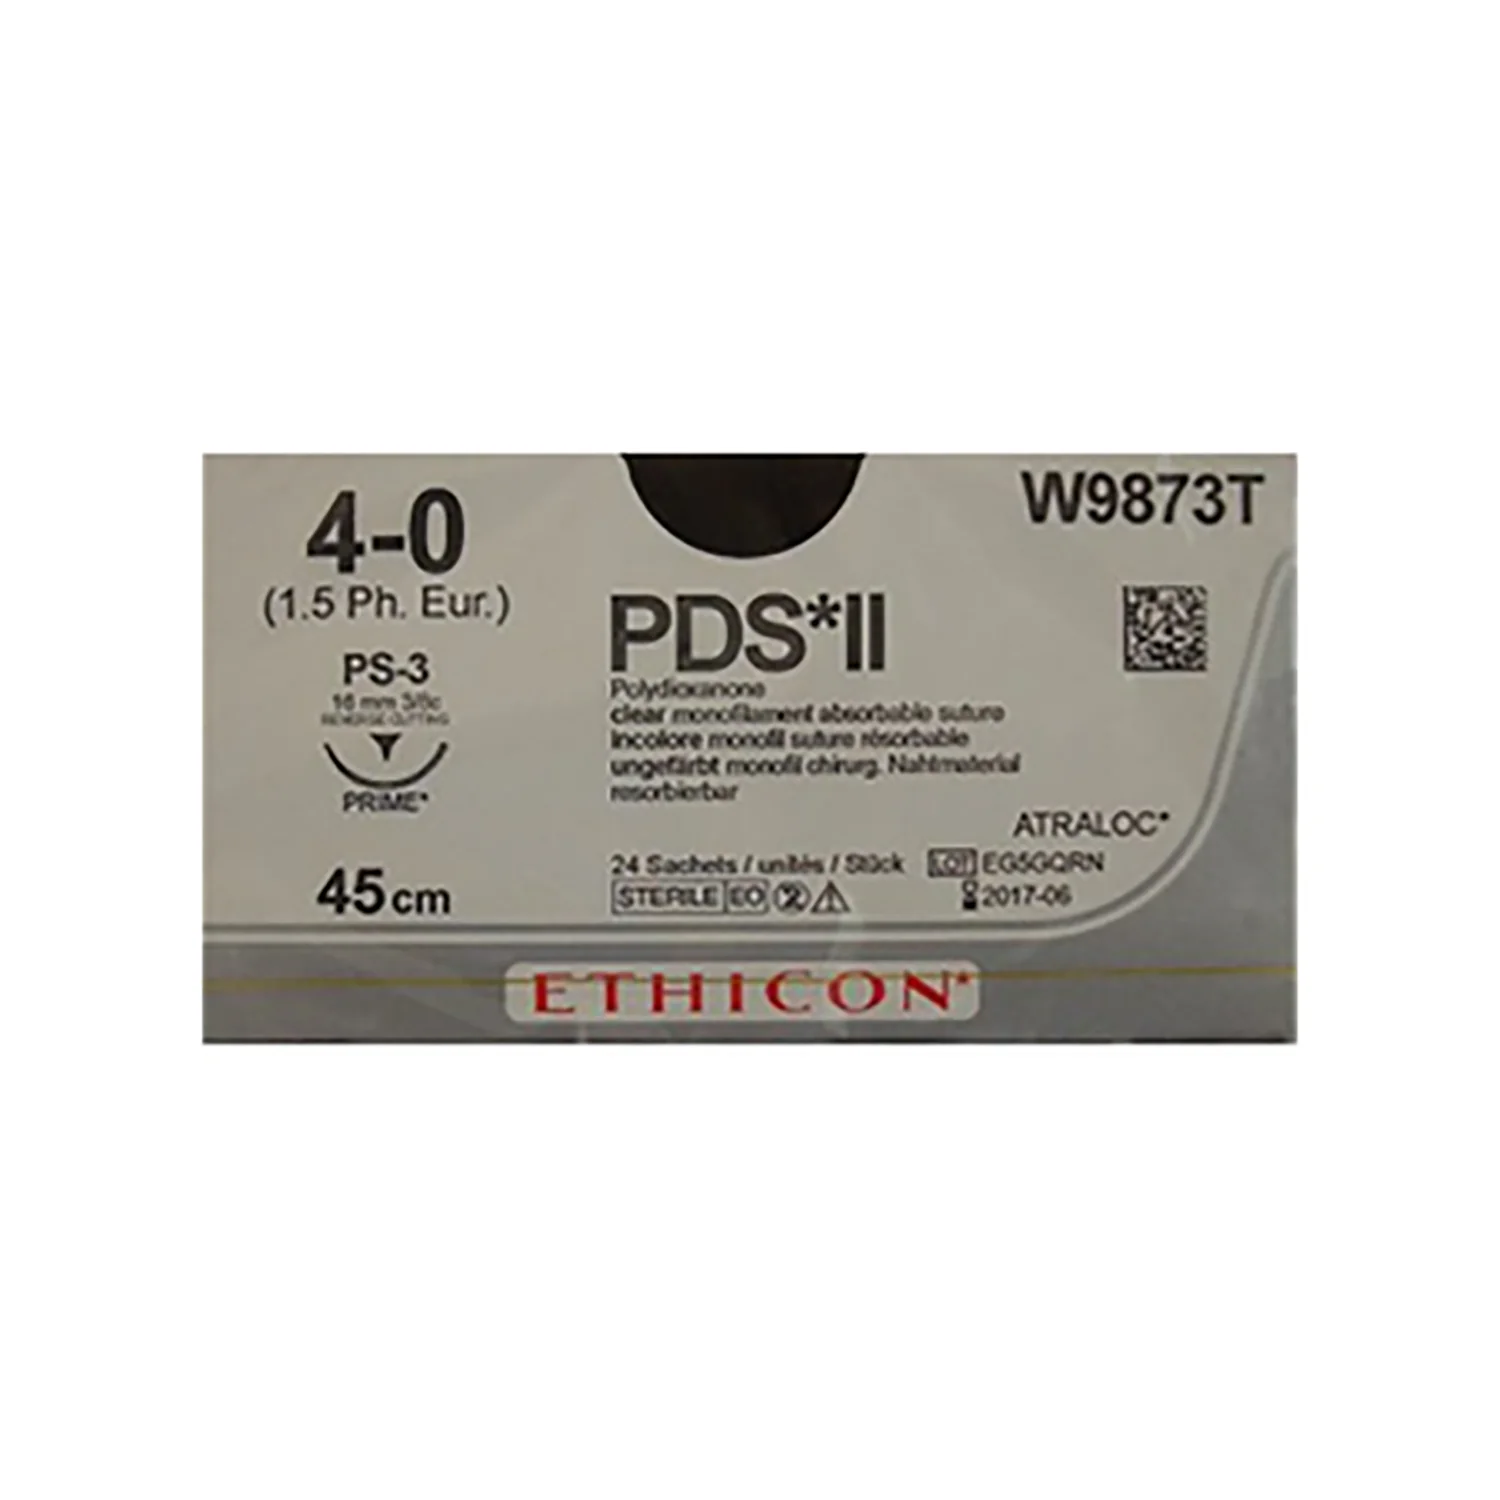 Ethicon PDS II Sutures USP 4-0, 3/8 Circle Reverse Cutting PS 3 - W9873T